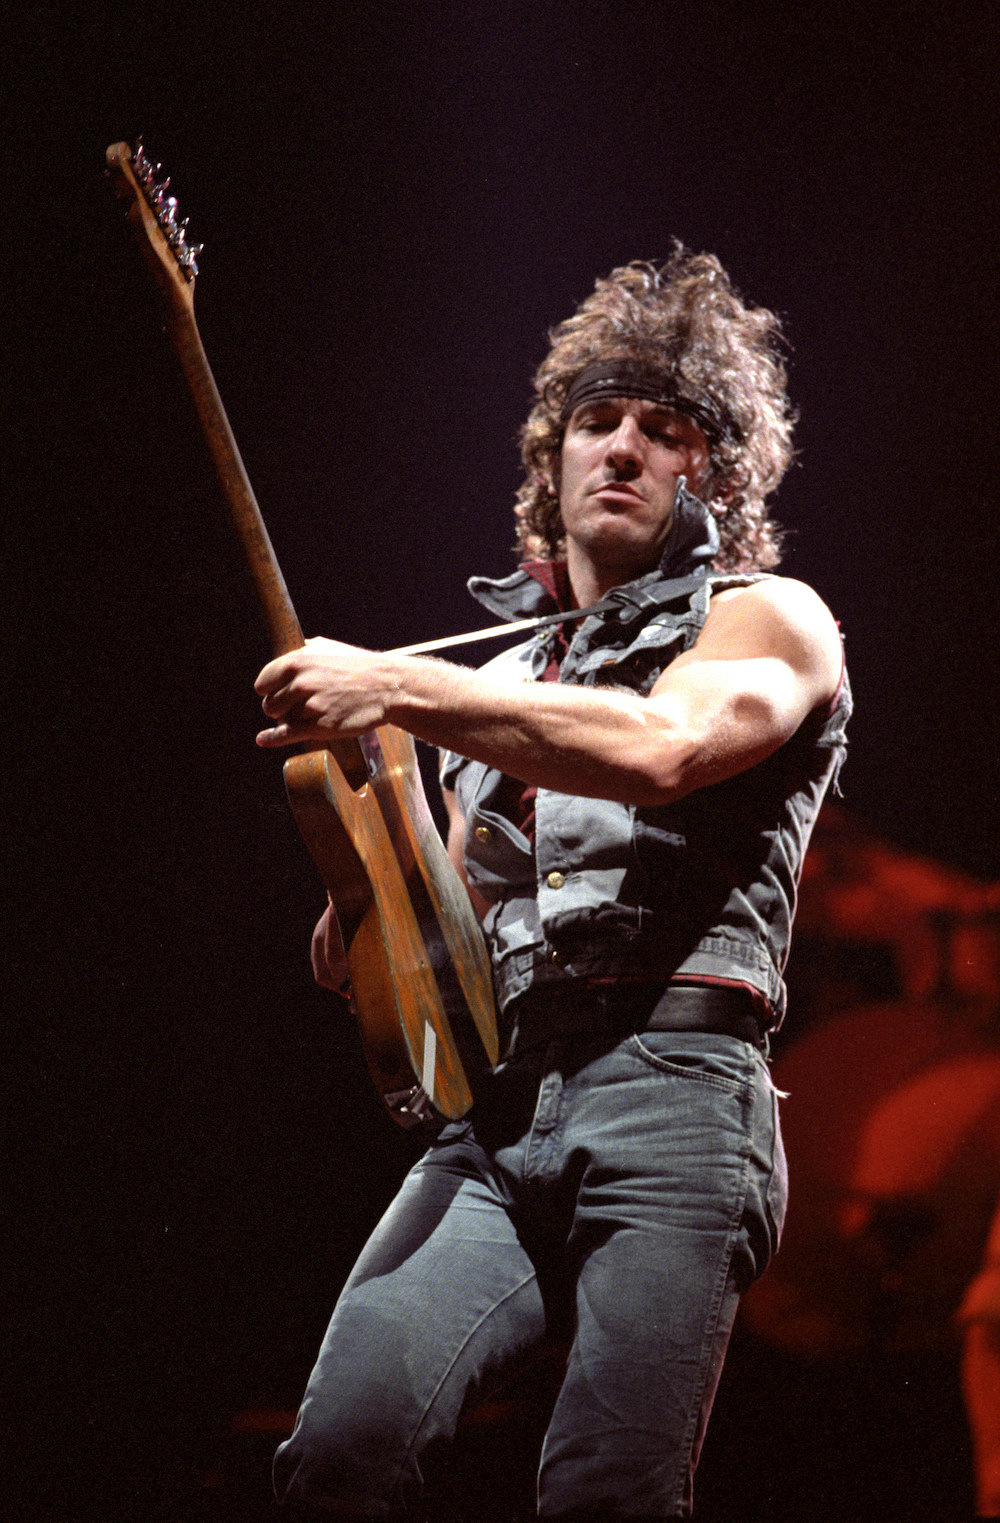 Bruce Springsteen performing onstage dressed in jeans, a denim vest, and a headband